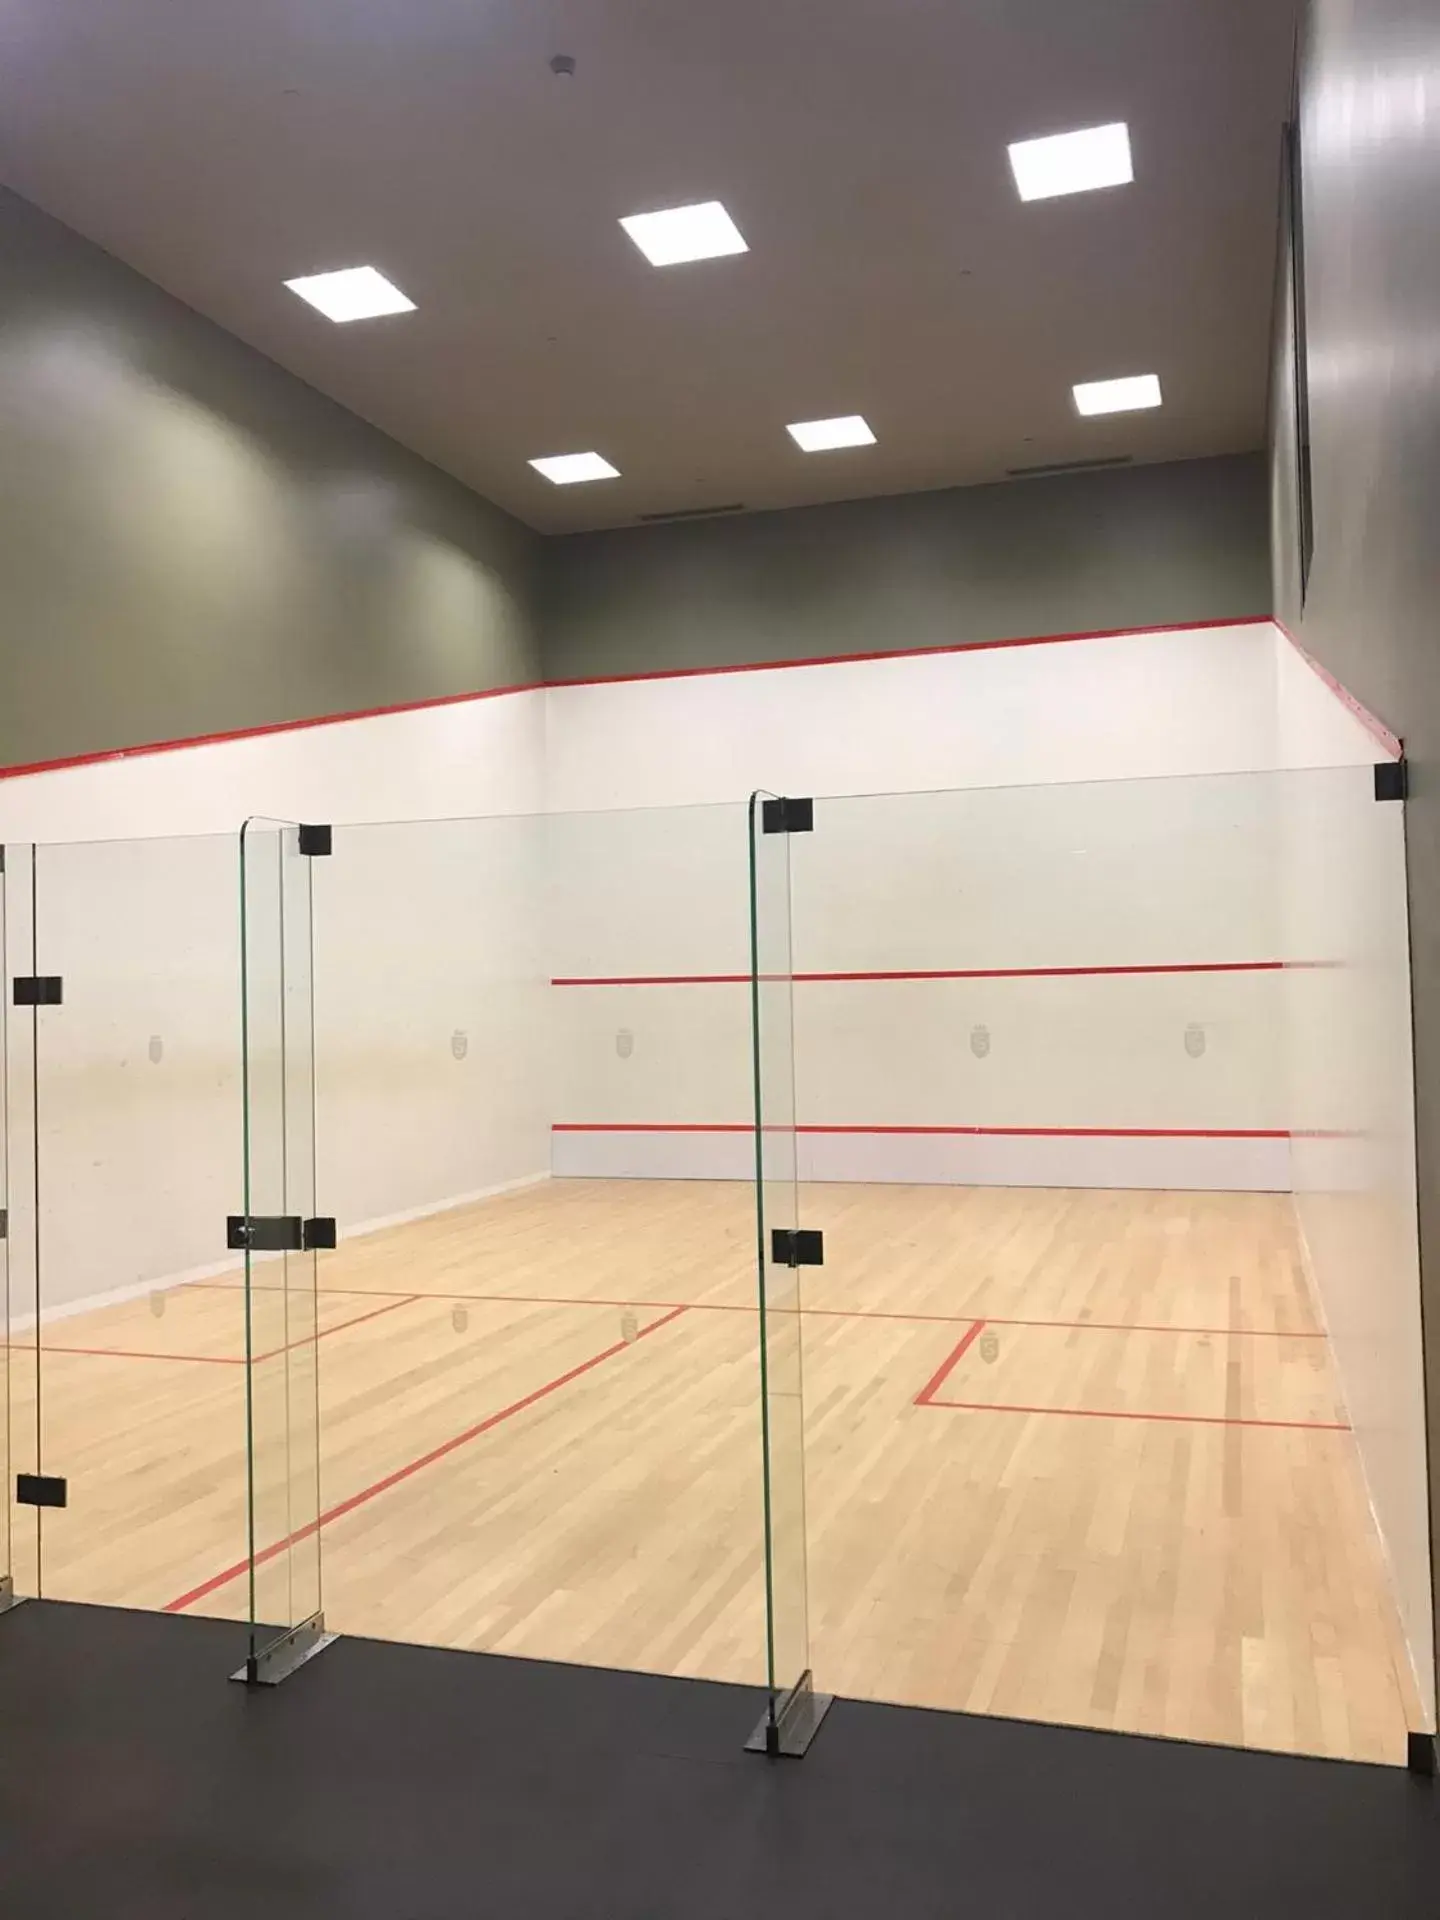 Squash, Other Activities in Saccharum - Resort and Spa - Savoy Signature